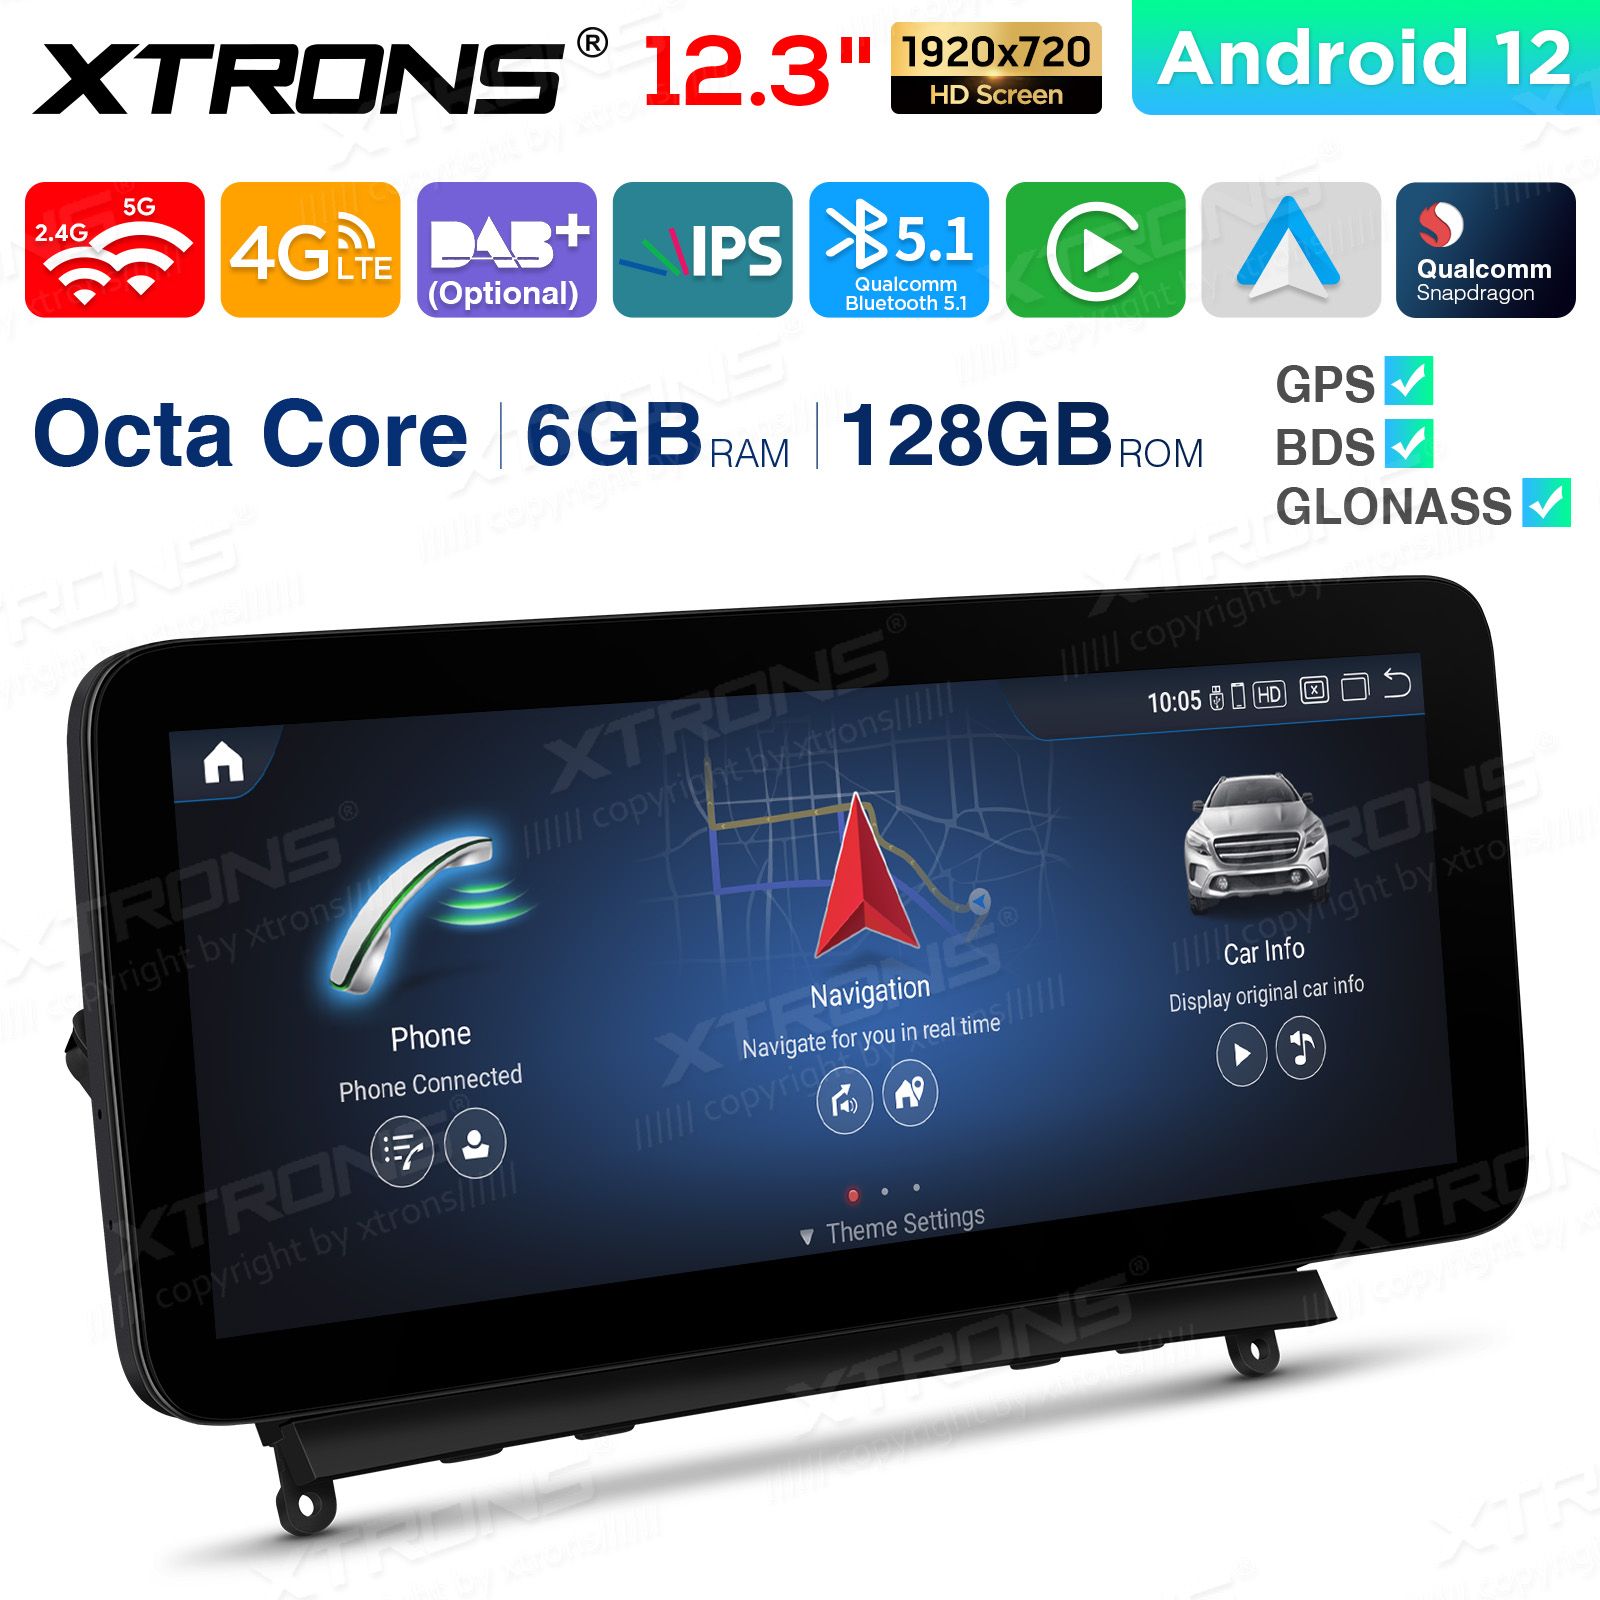 Mercedes-Benz C-Class | W204 (2008-2010) | NTG4.0 (2007-2010) Android 12 Car Multimedia Player with GPS Navigation